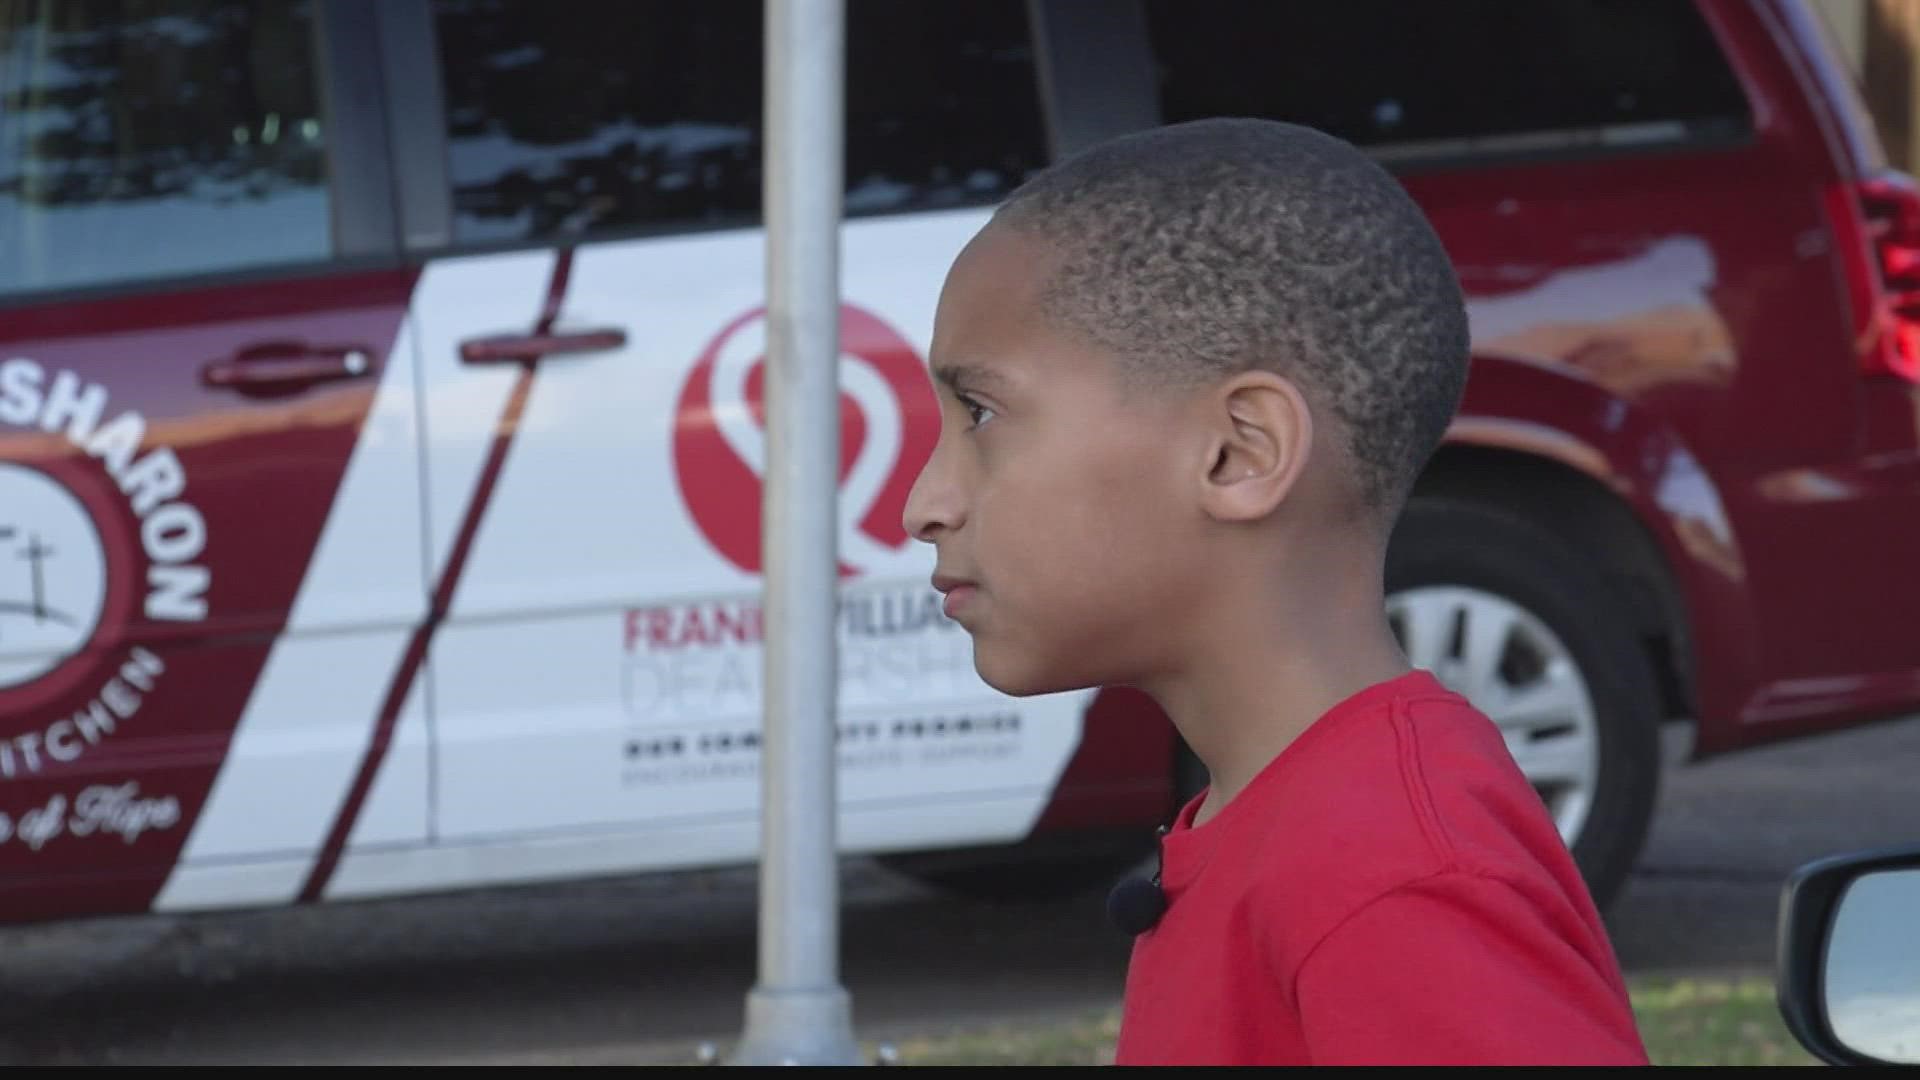 Malachi Mason is 10 years old and spends his free time hoping those less fortunate.